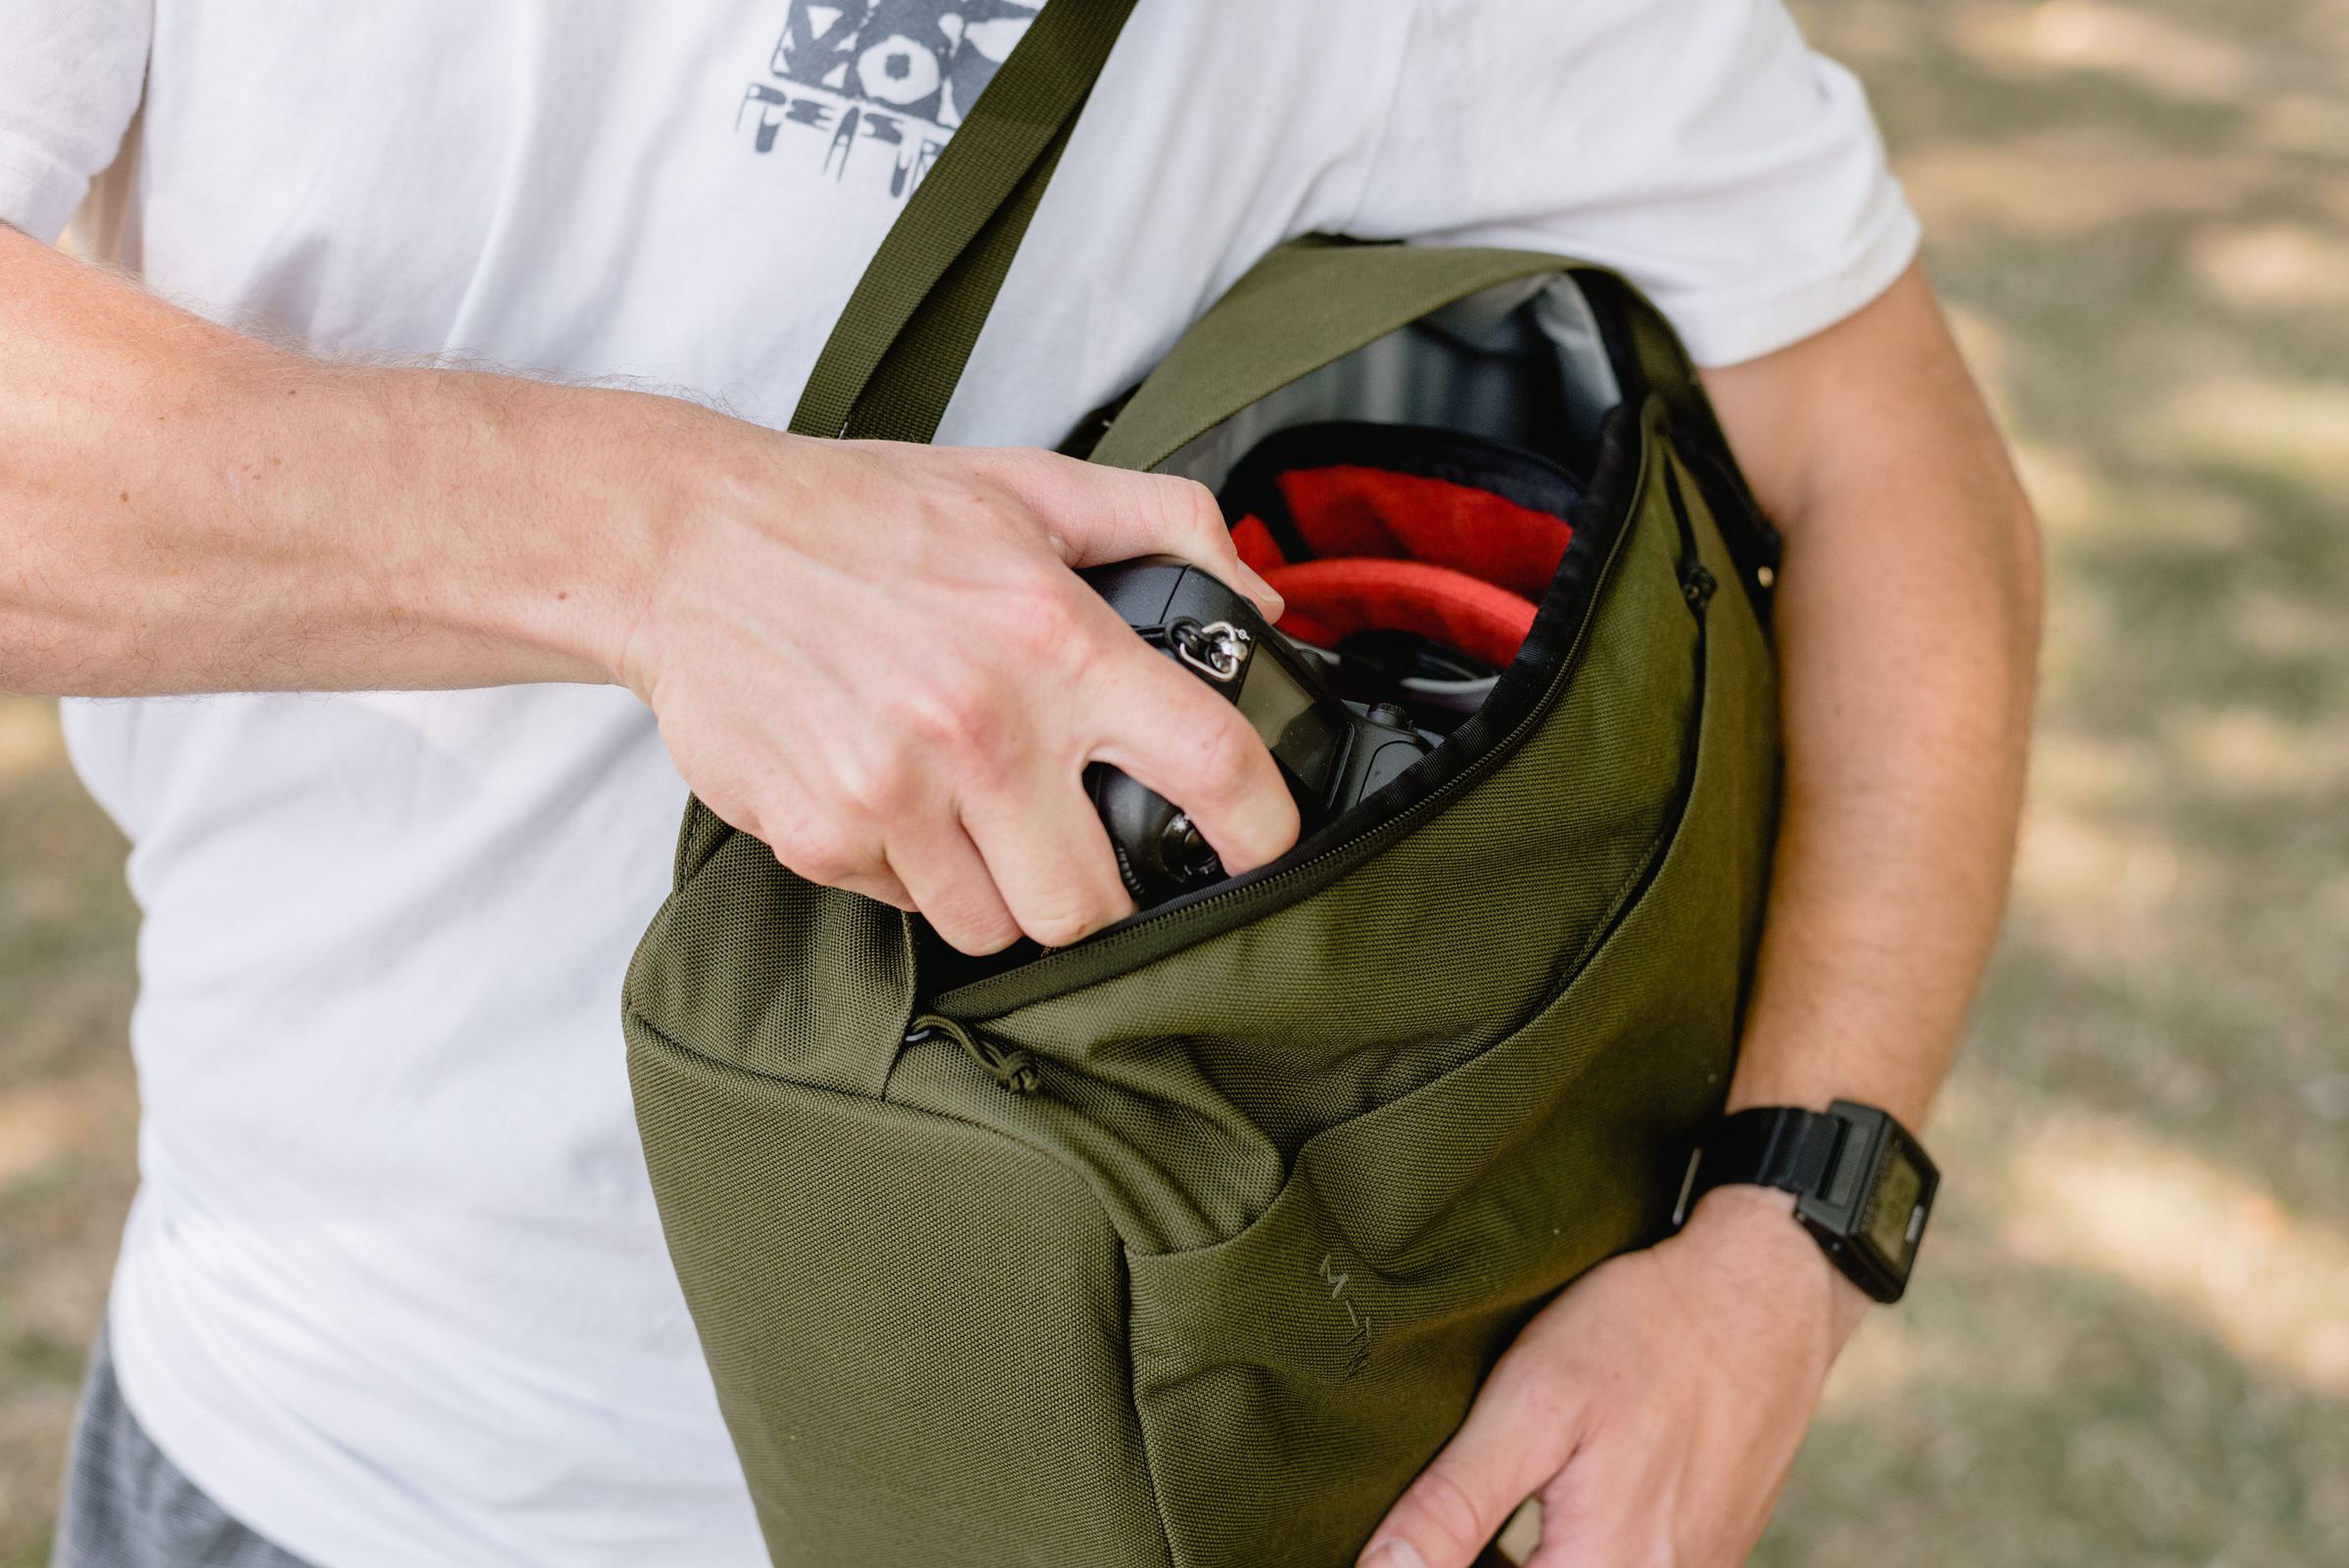 The Camera Insert fits into the backpack and allows for quick access to camera gear.